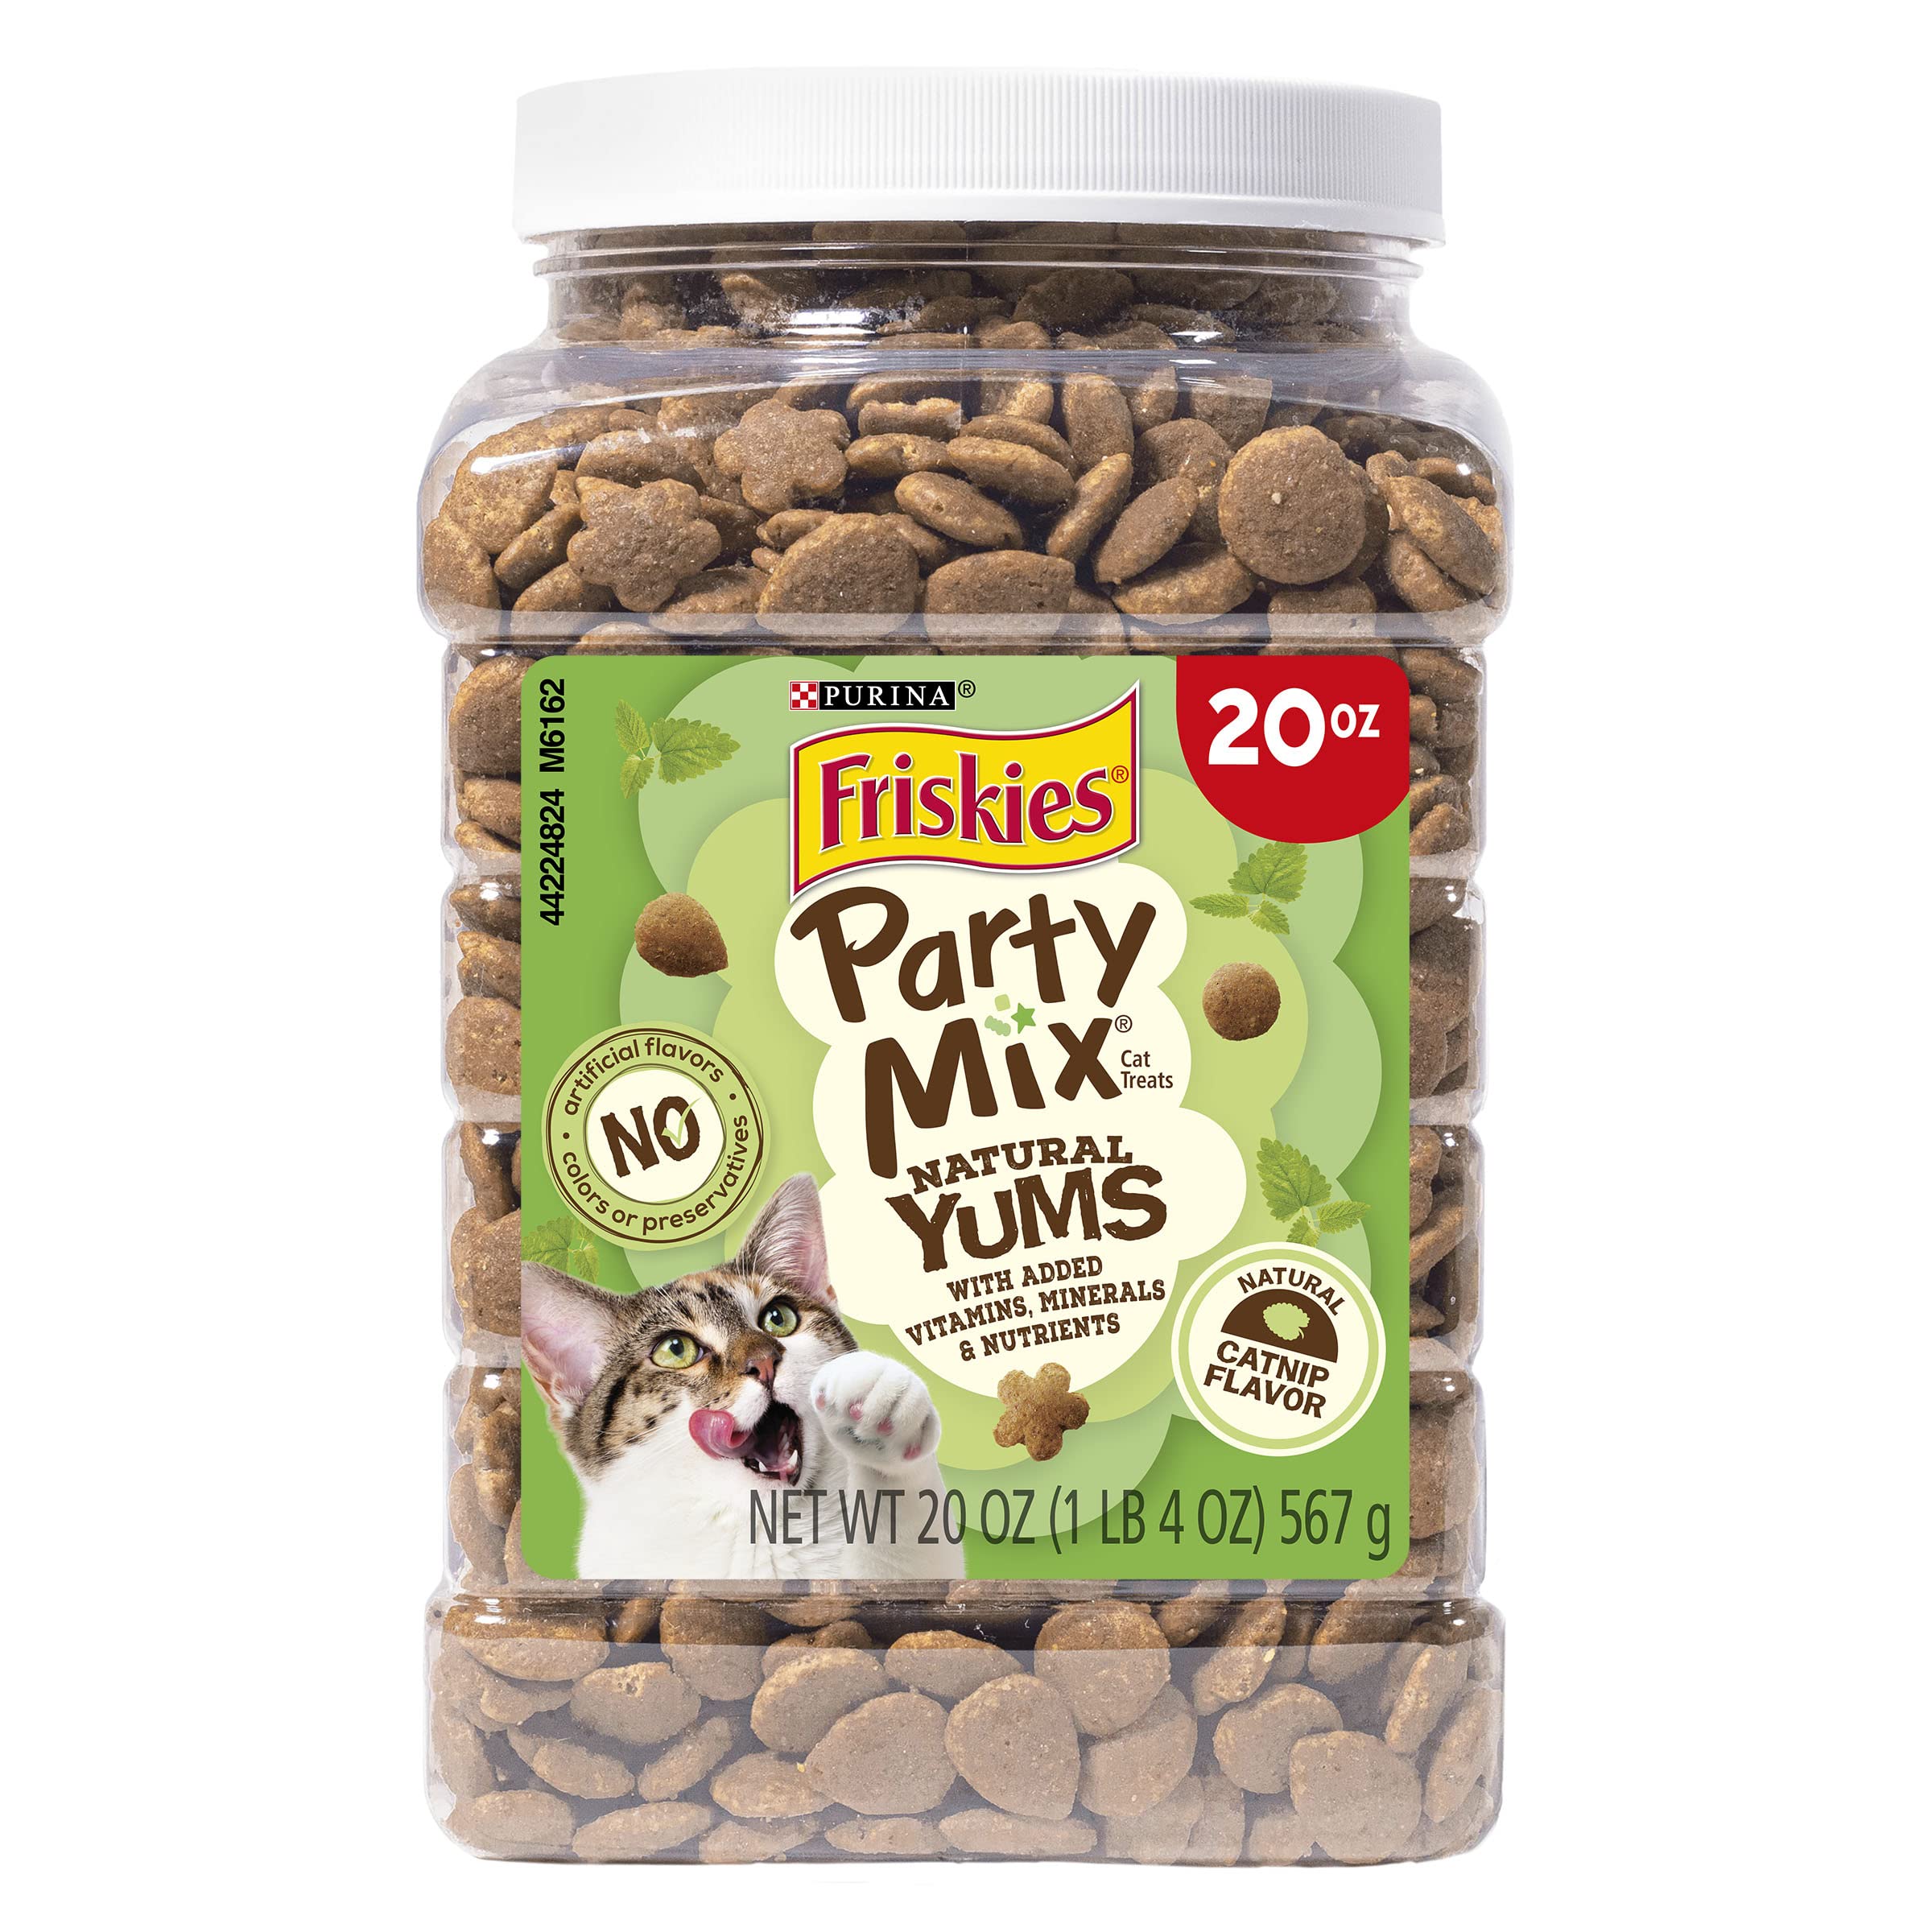 Purina Friskies Party Mix Natural Yums Catnip Flavor - 20 oz, $4.27 with Subscribe and Save, Amazon $4.27